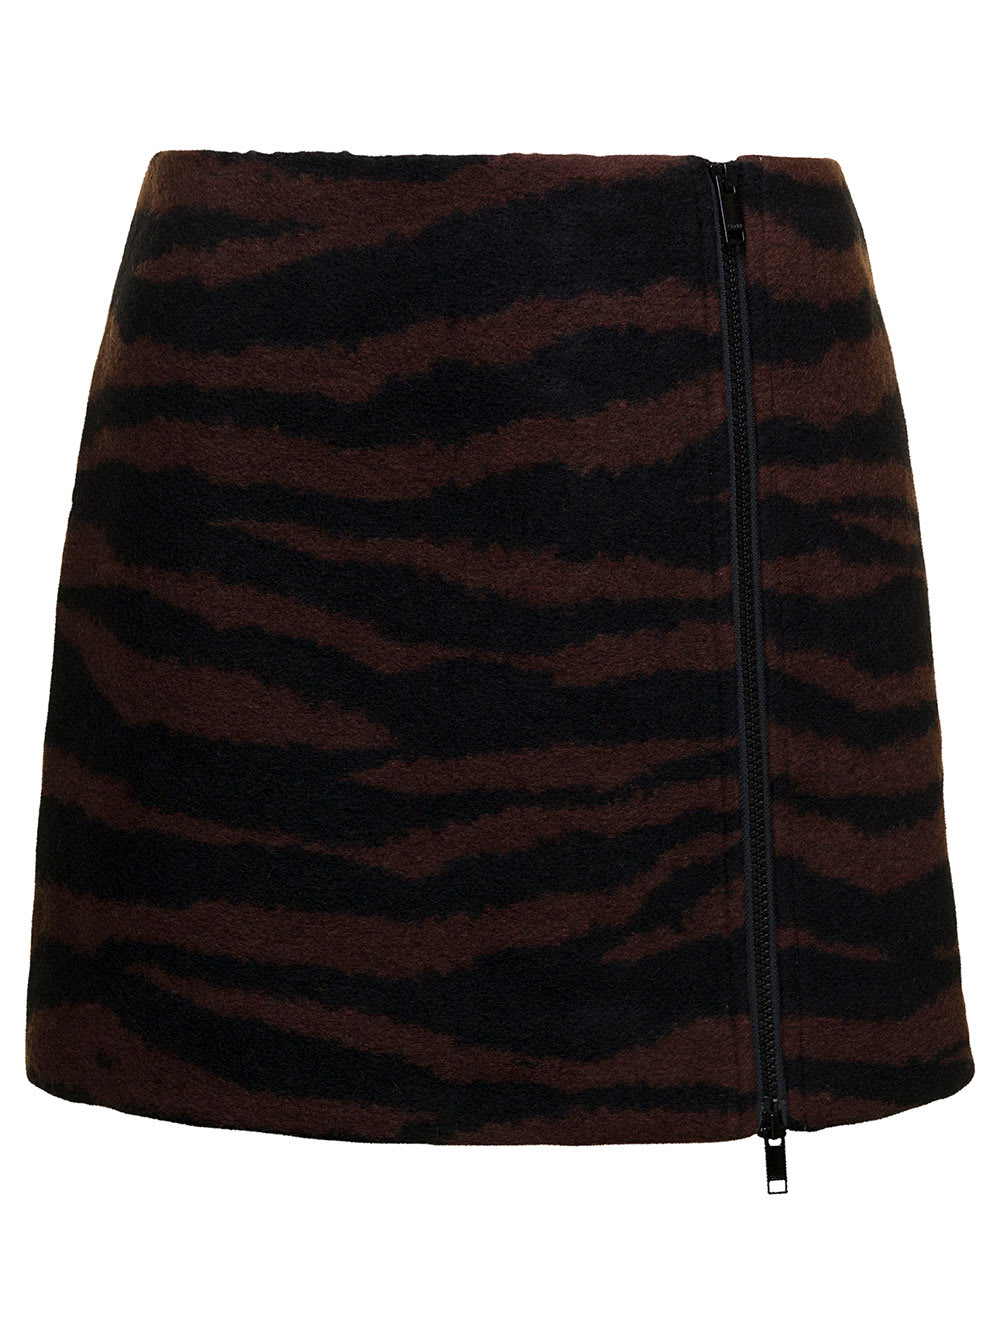 GANNI BROWN AND BLACK MINI-SKIRT WITH ZIP AND ZEBRA PRINT IN WOOL WOMAN